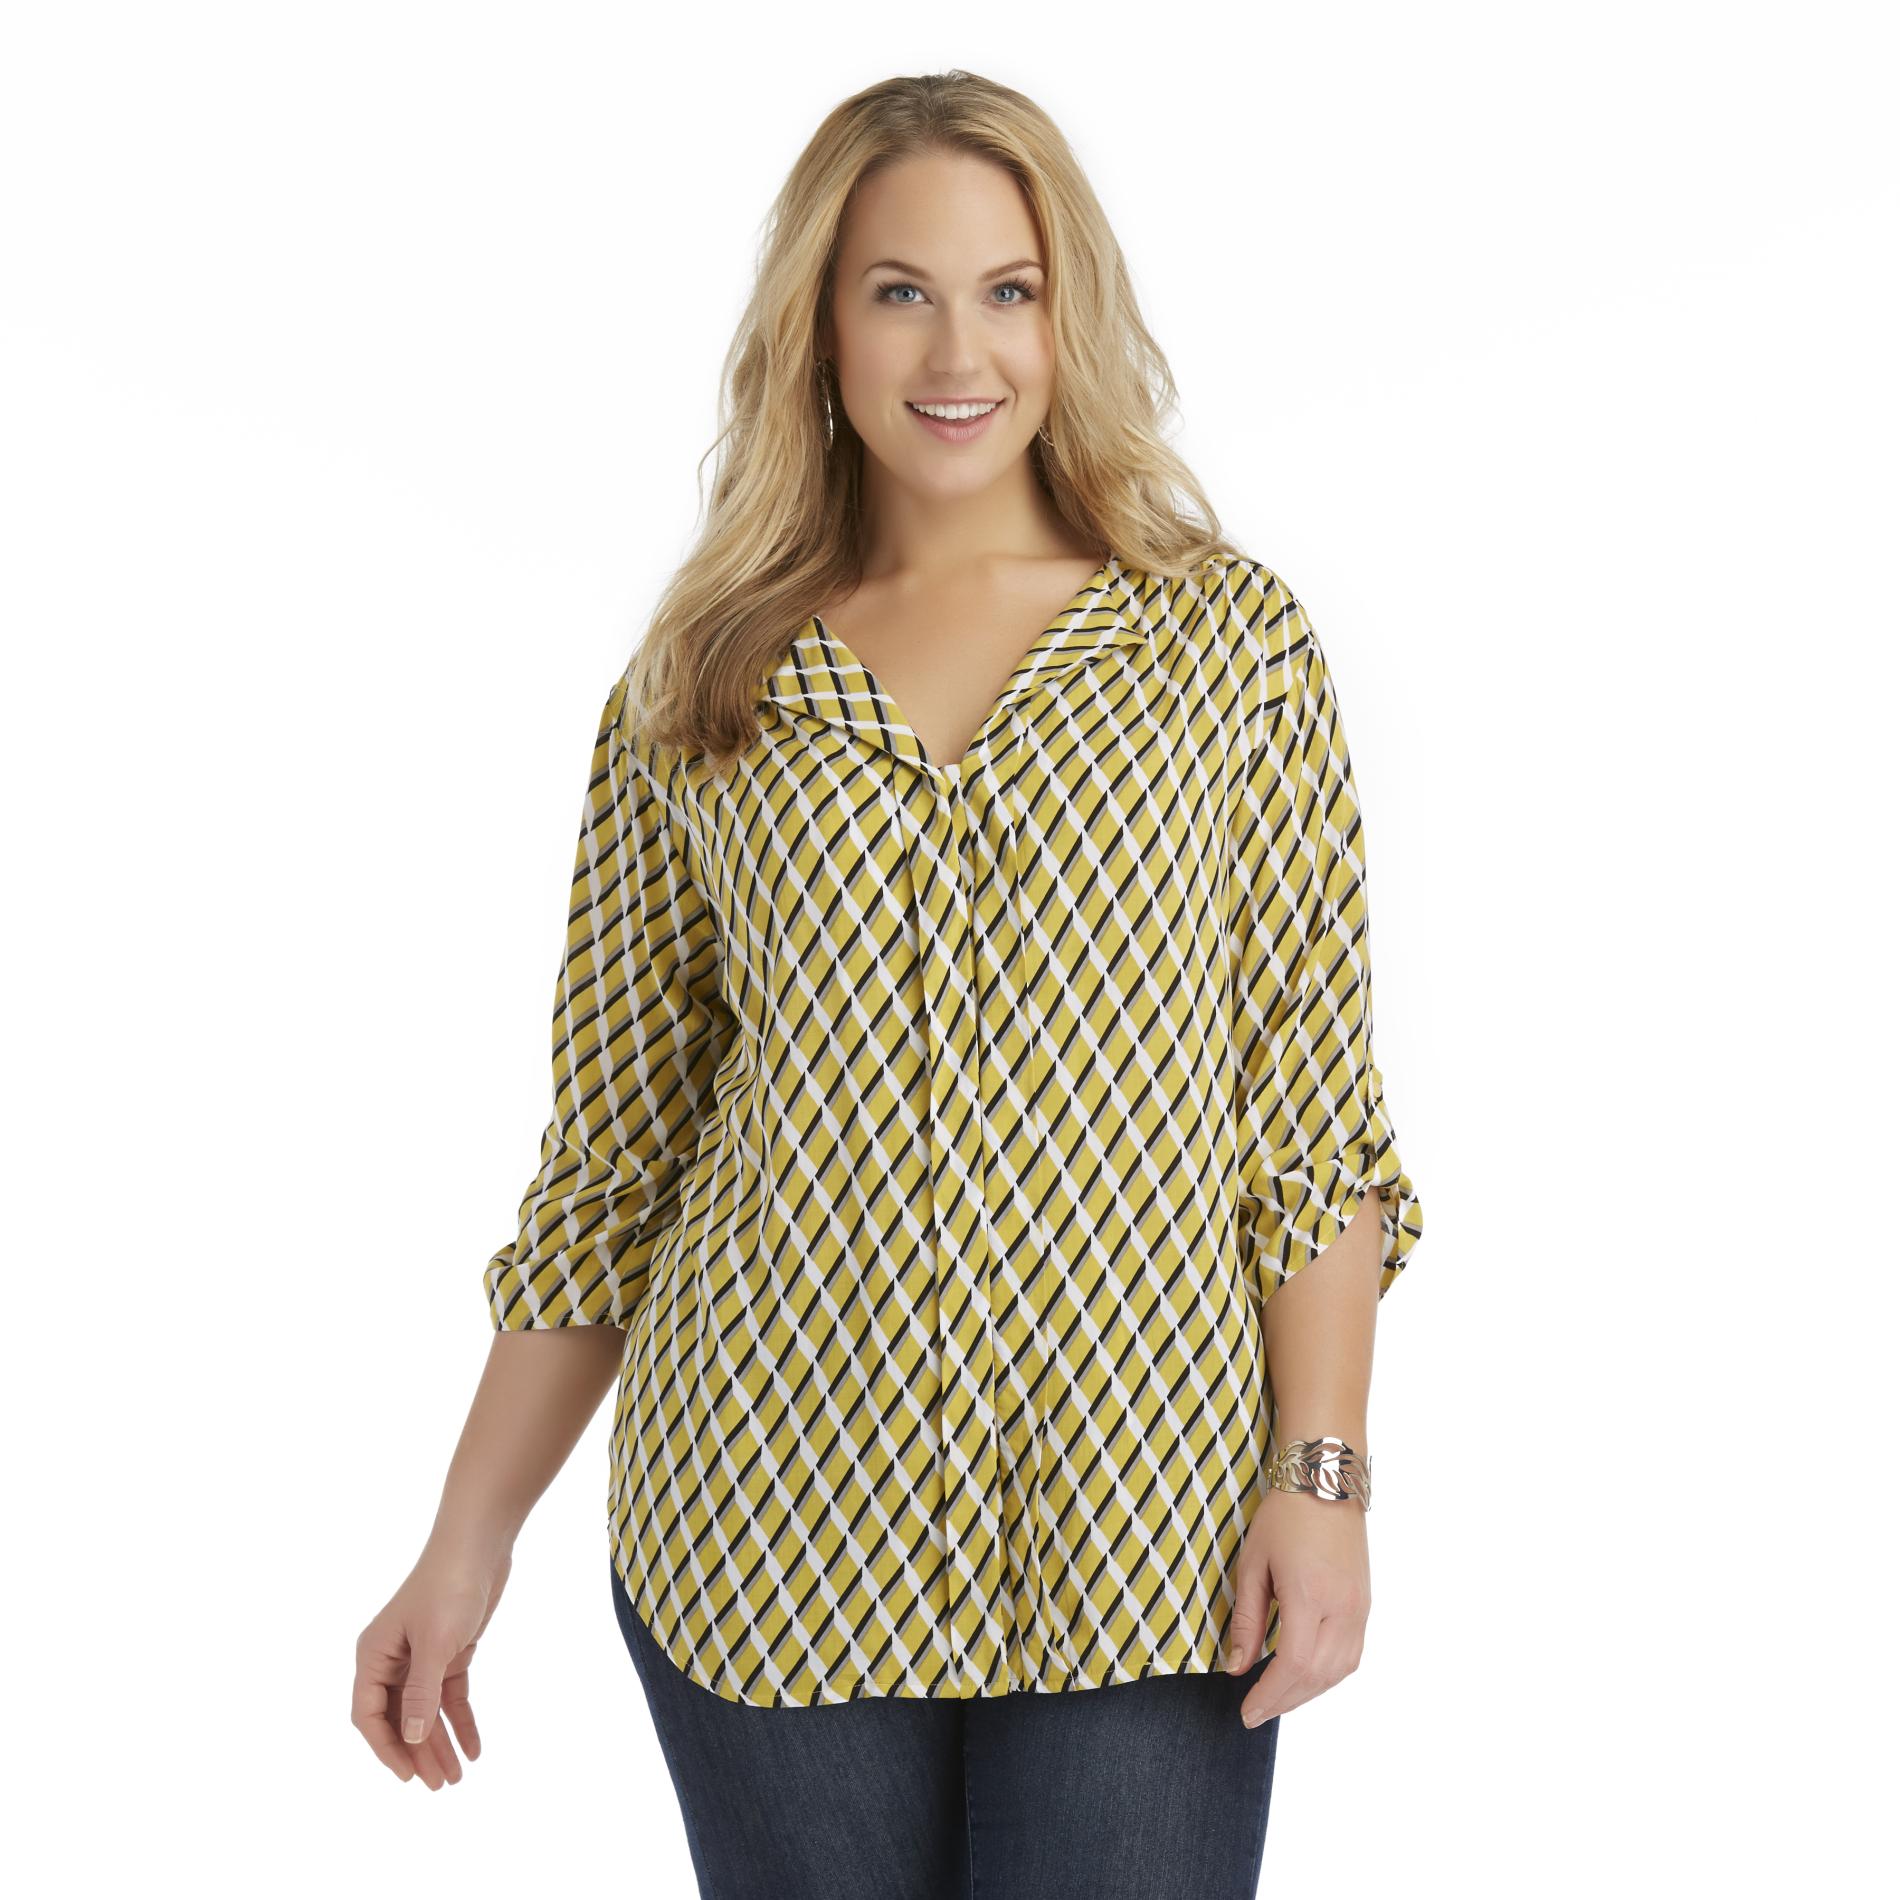 Covington Women's Plus Roll Tab Blouse - Abstract